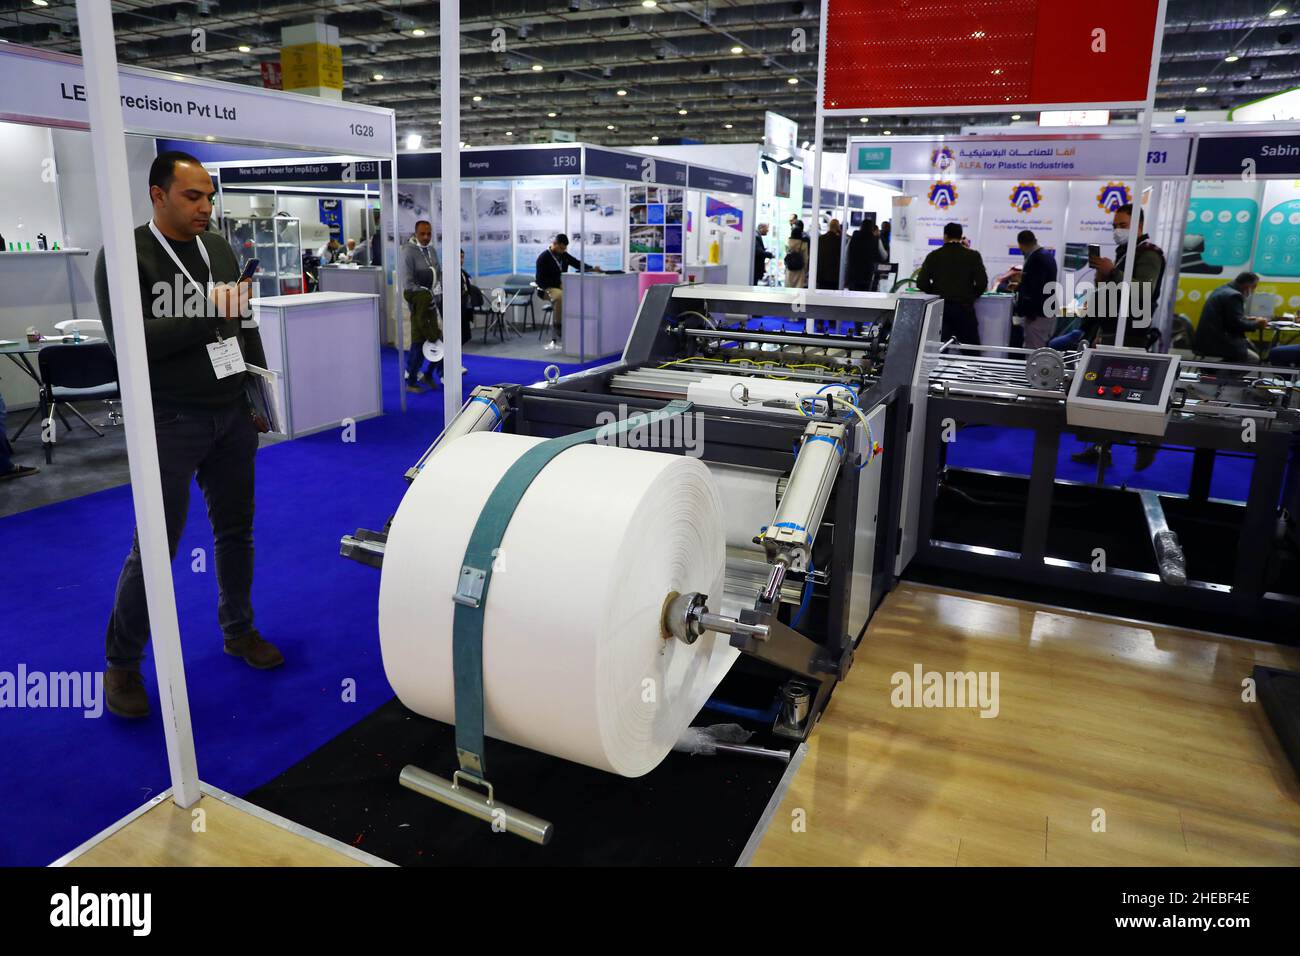 Cairo, Egypt. 9th Jan, 2022. A visitor takes photos at the International Plastics Exhibition in Cairo, Egypt, on Jan. 9, 2022. More than 300 plastics industry firms from over 20 countries gathered in the Egyptian capital Cairo to showcase their raw materials, machinery, and semi-finished products in Egypt's 18th International Plastics Exhibition (PLASTEX). Credit: Ahmed Gomaa/Xinhua/Alamy Live News Stock Photo